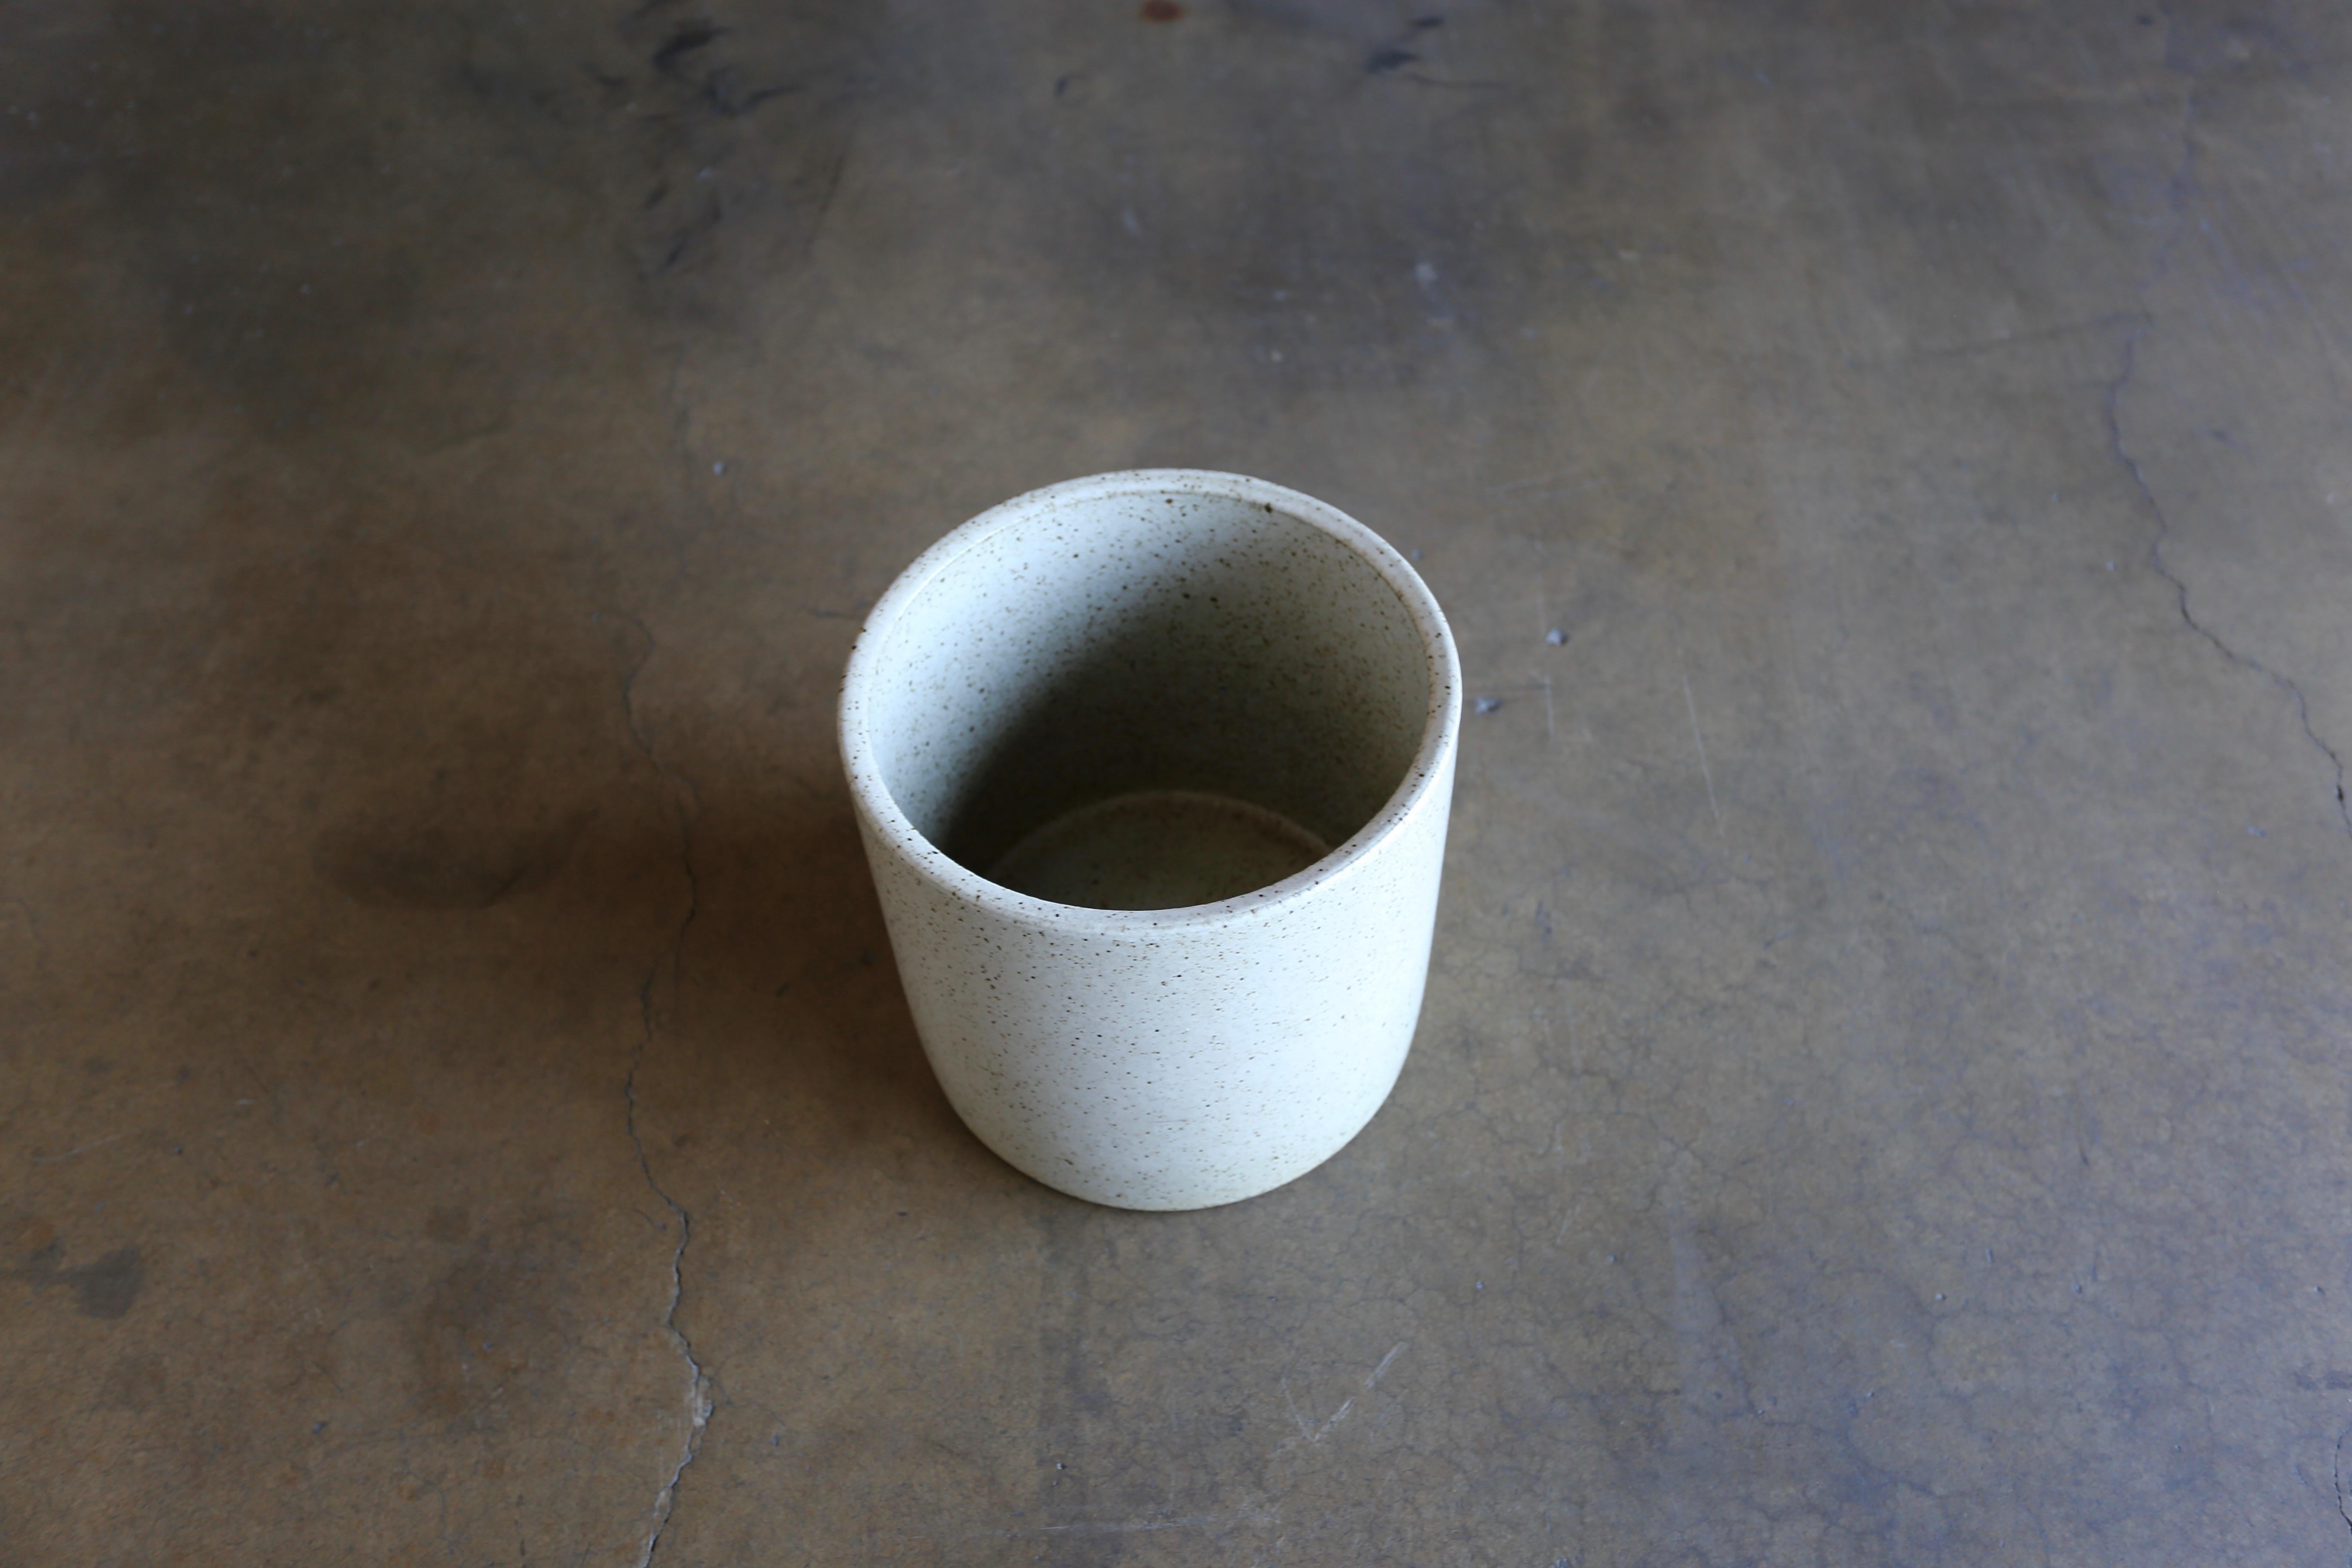 American Small-Scale Ceramic Planter by David Cressey for Architectural Pottery